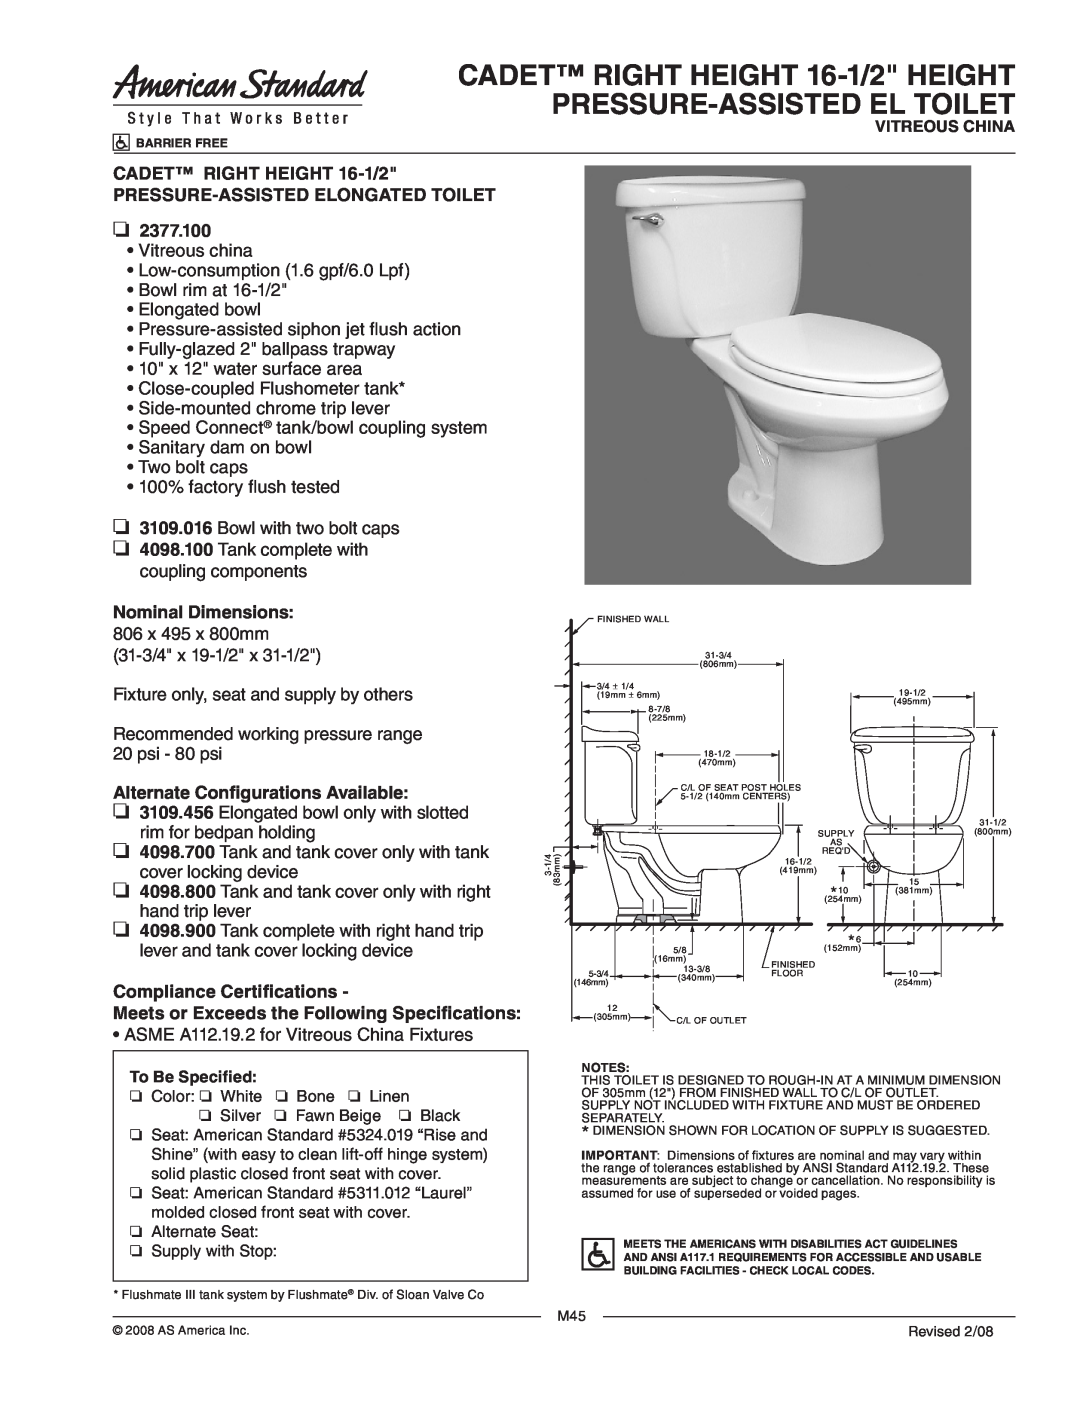 American Standard 3109.016 dimensions CADET RIGHT HEIGHT 16-1/2HEIGHT, Pressure-Assistedel Toilet, Nominal Dimensions 